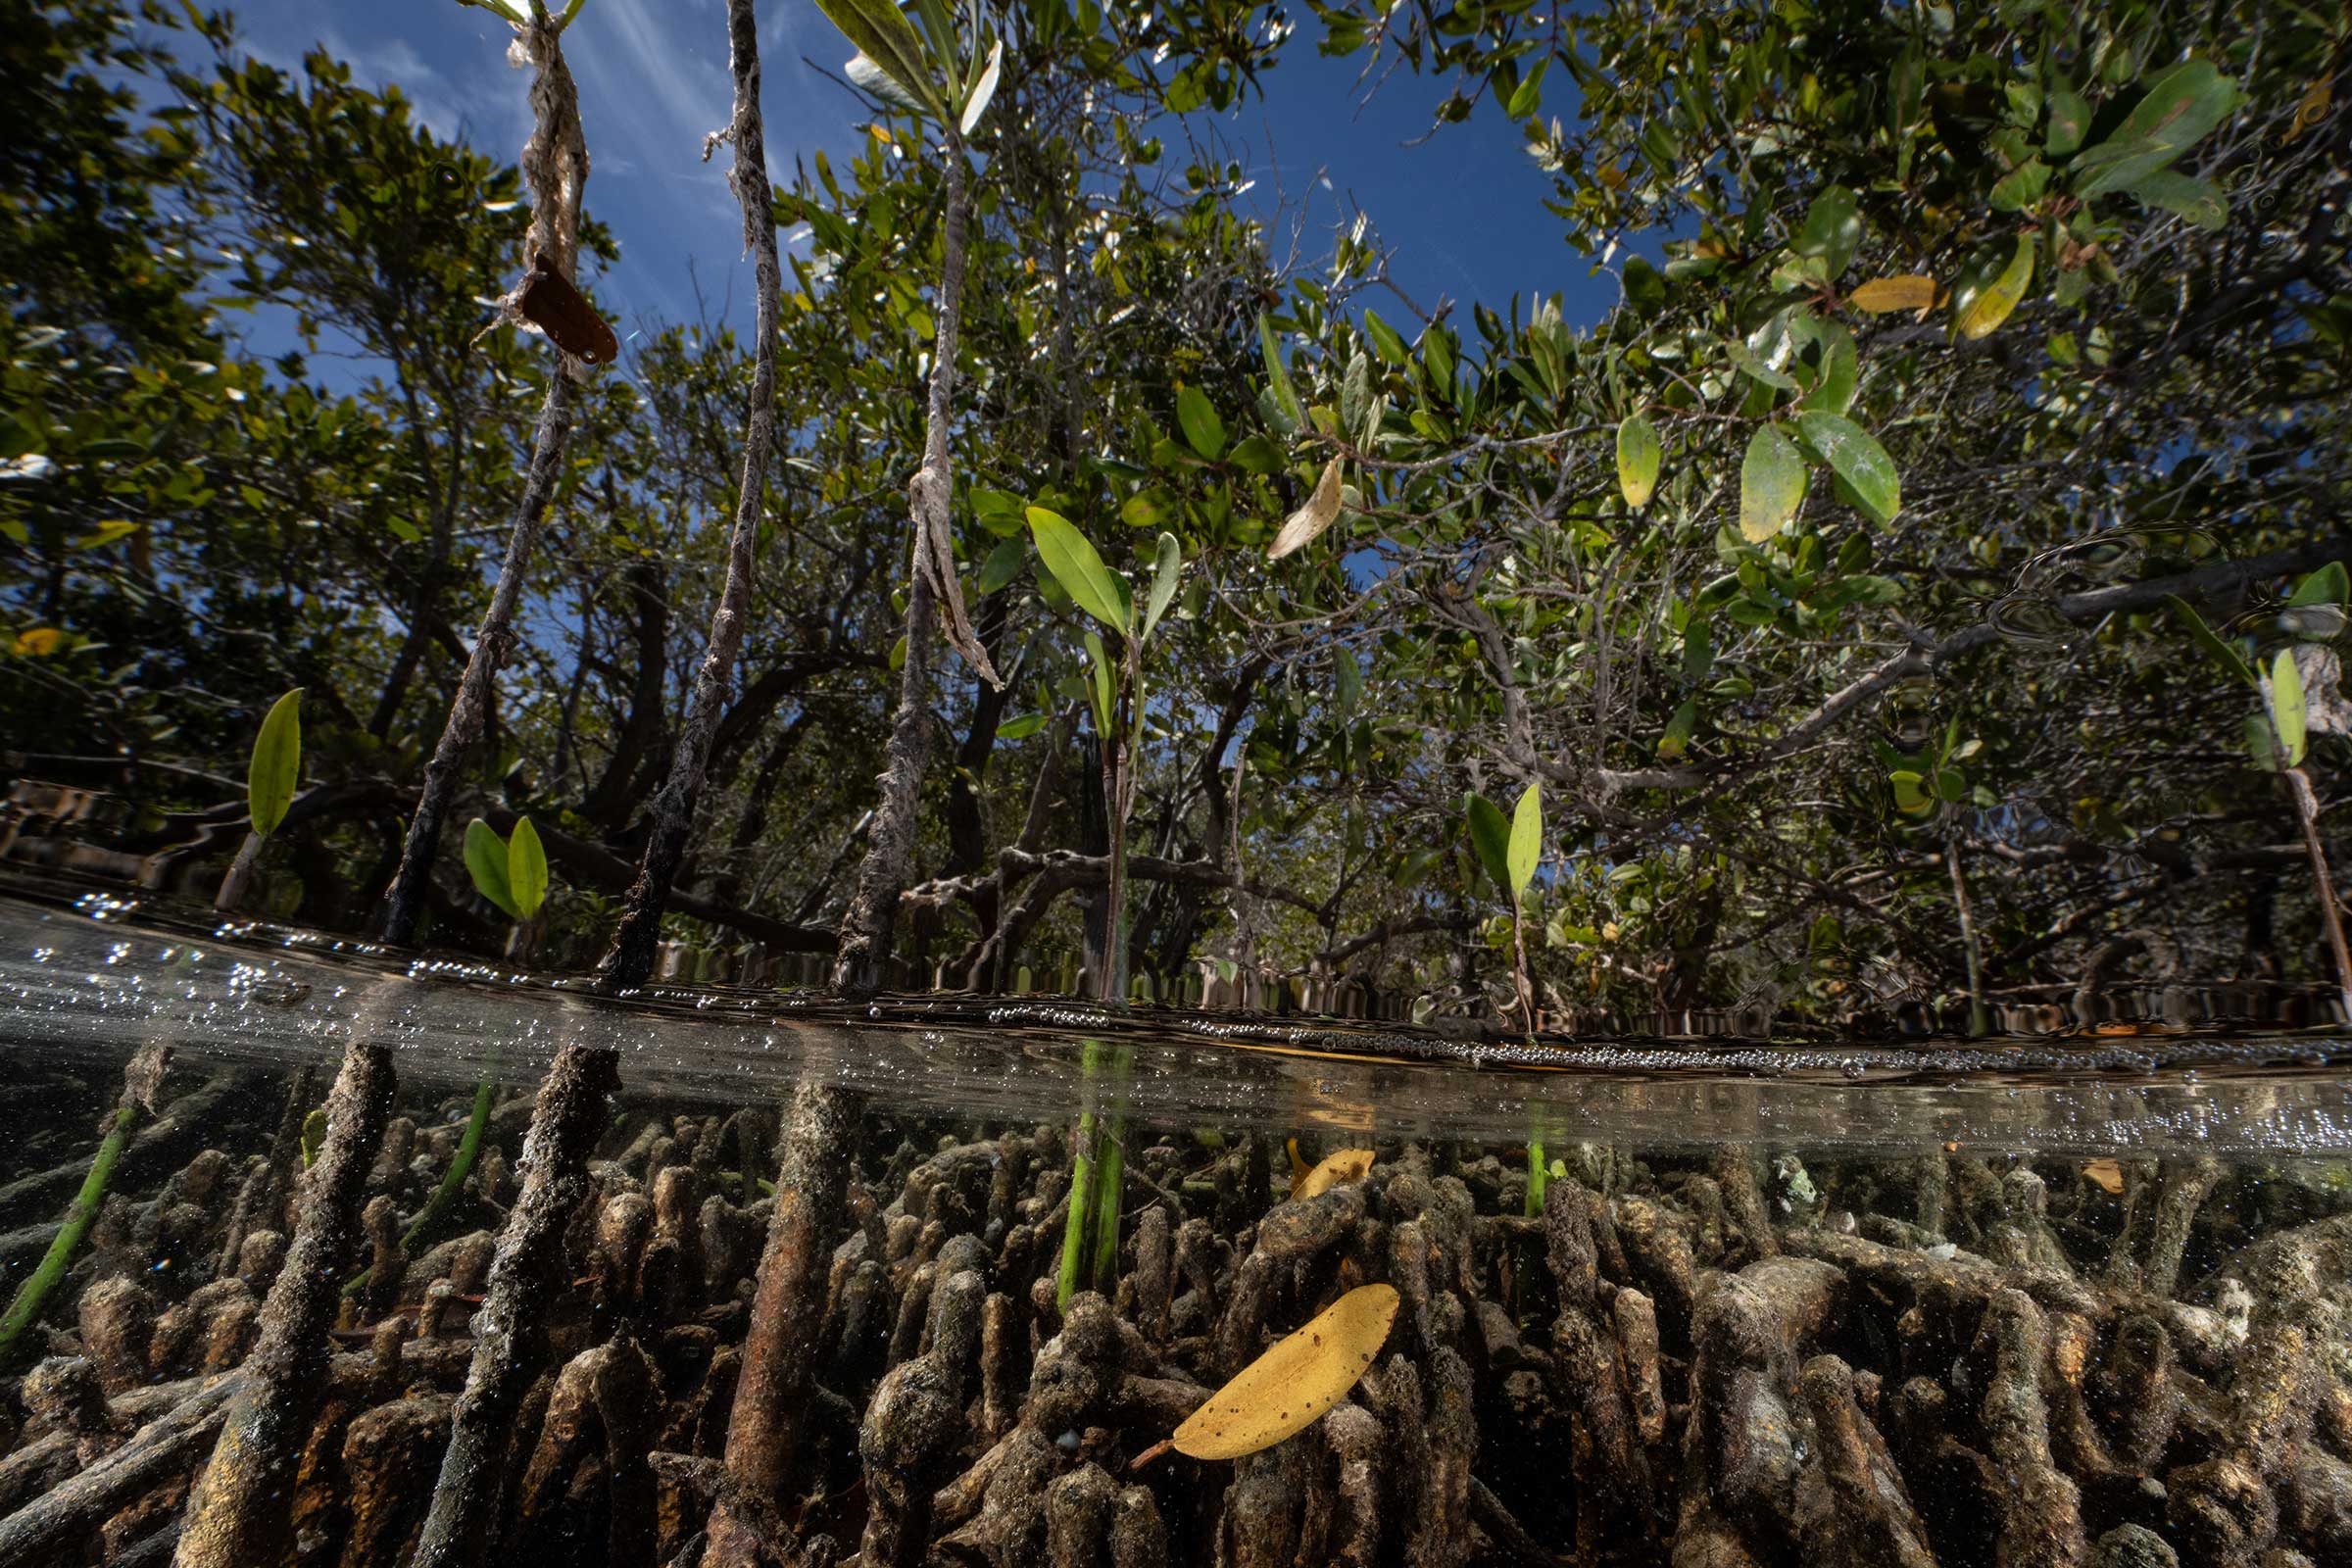 Mangroves, with their roots in sediment, absorb four times more carbon than any tree on land. The destruction of mangroves therefore has significant economic as well as ecological impacts for the other coastlines they inhabit. With the creation of the Marine Biosphere Reserve these mangroves would be protected from being cut down for hotels, golf courses and other coastal development. (Cristina Mittermeier—SeaLegacy)